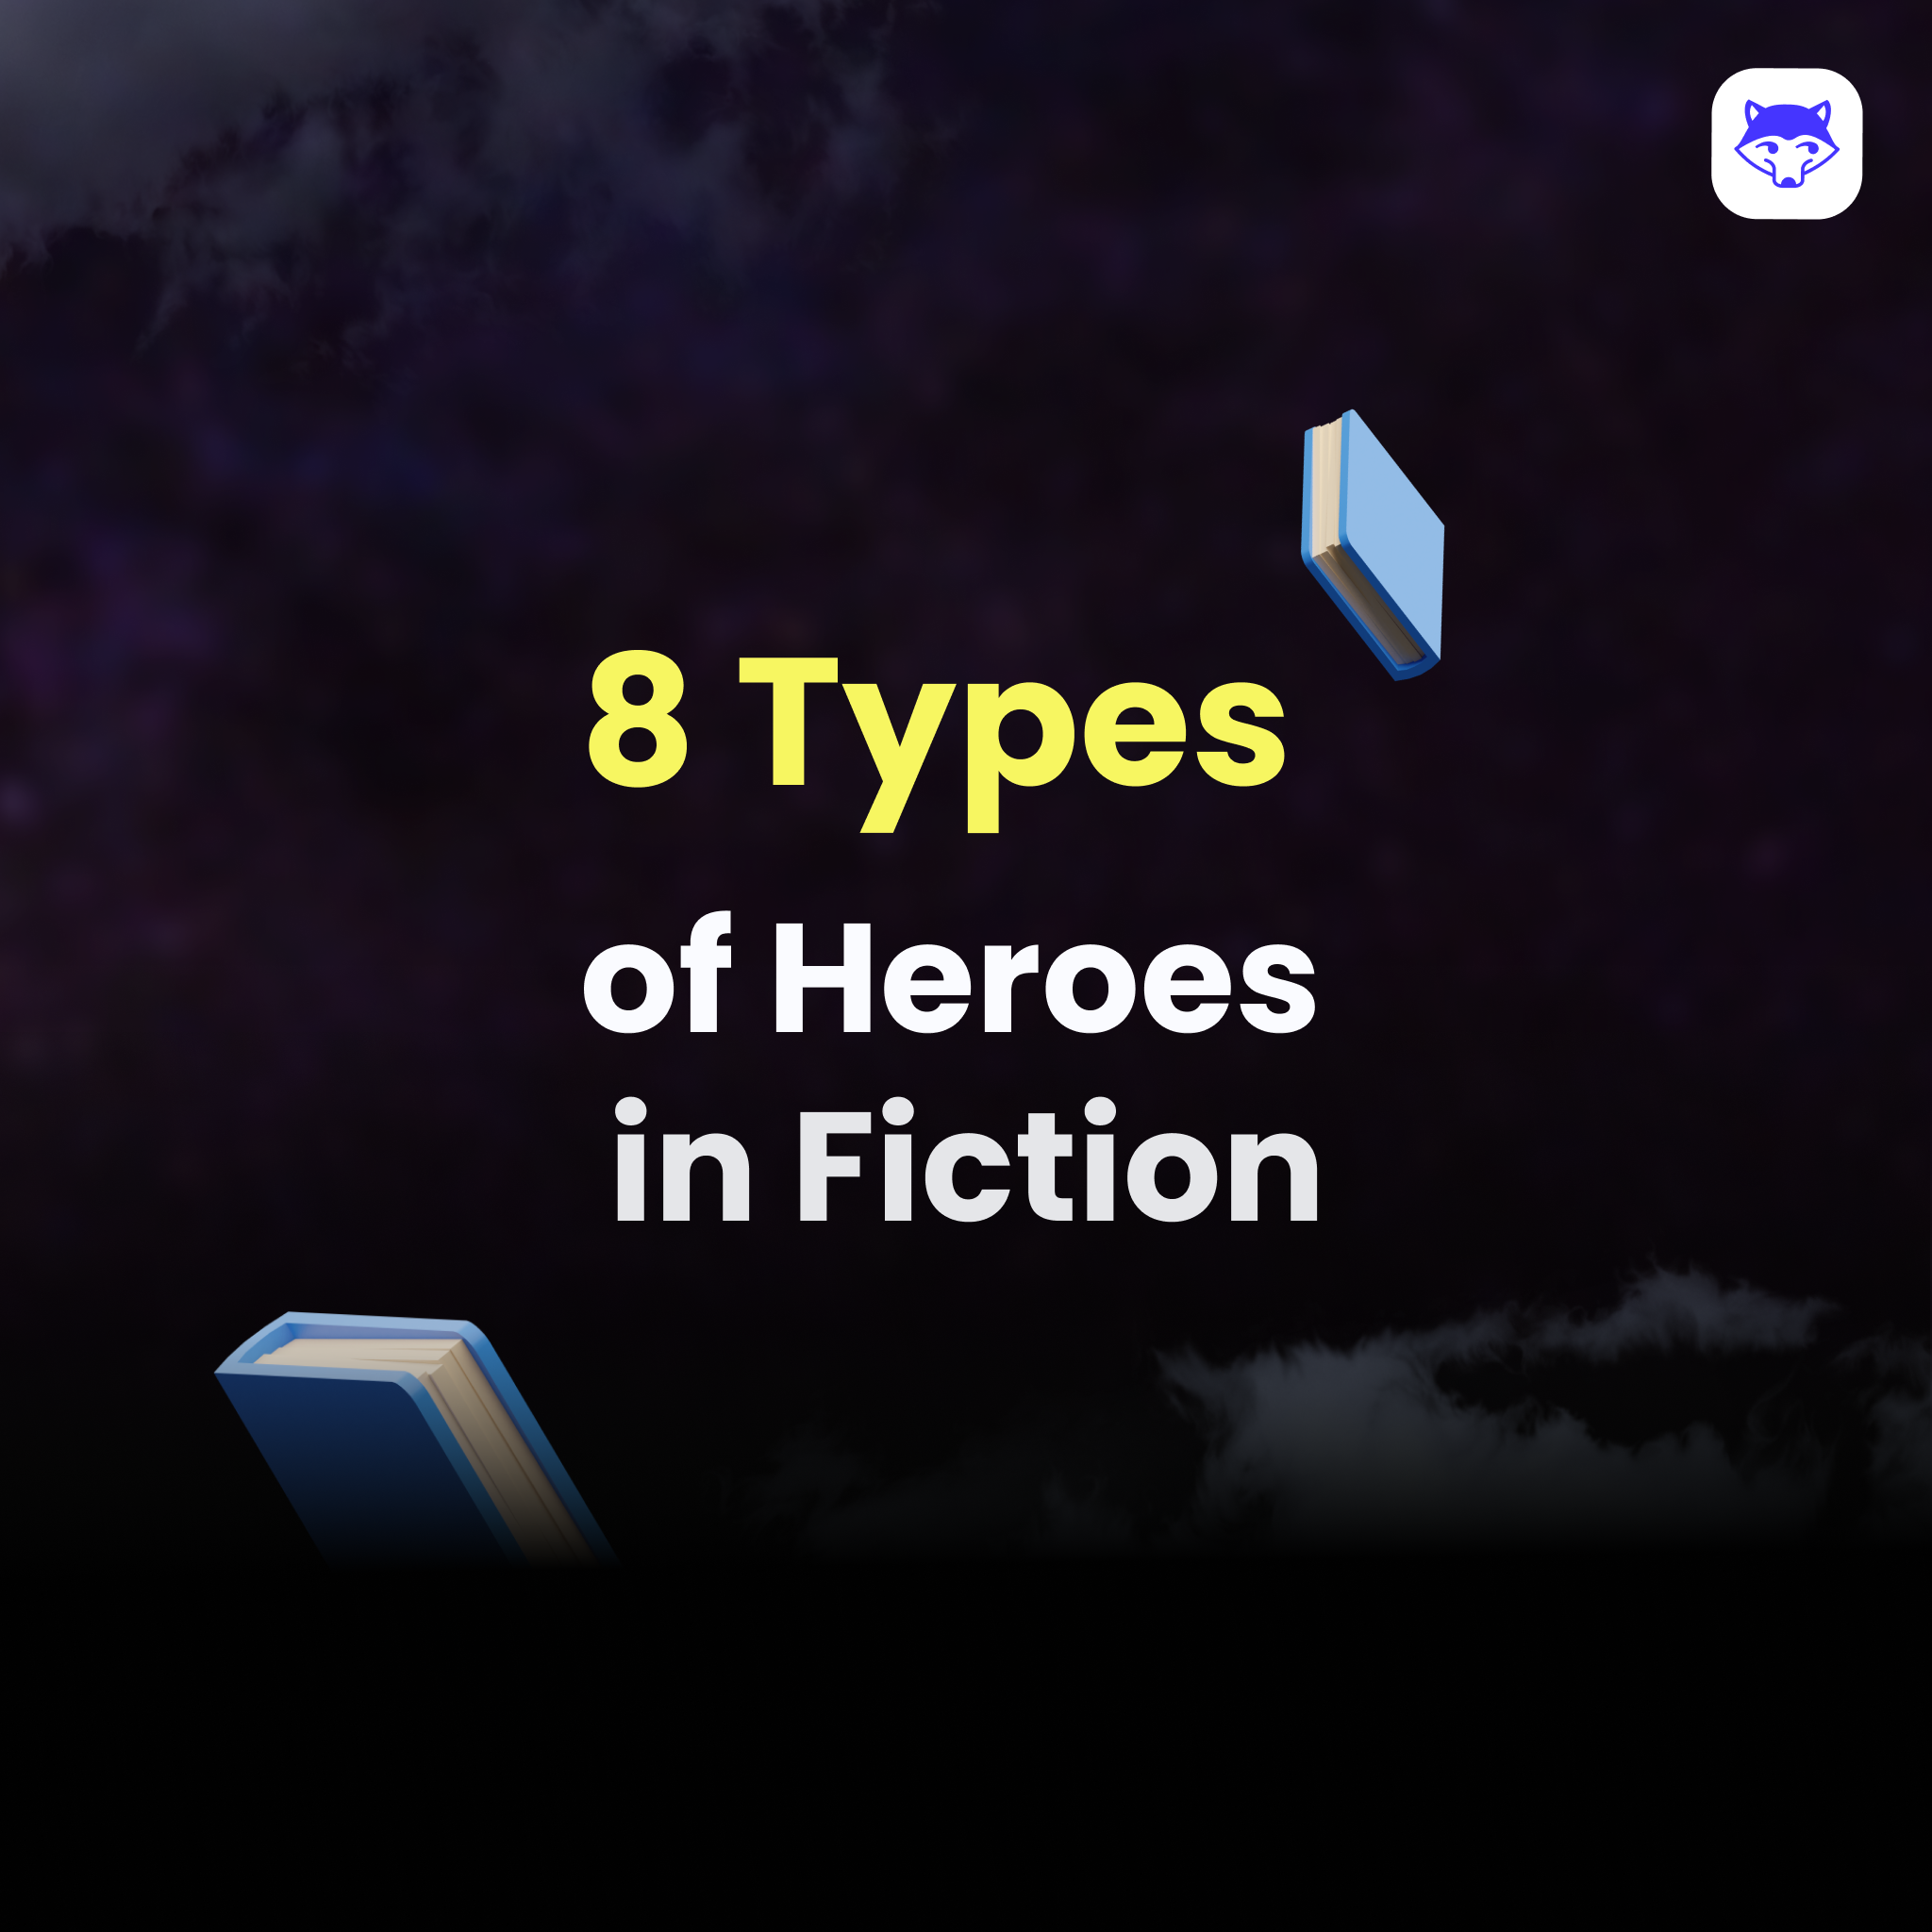 8 Types of Heroes in Fiction